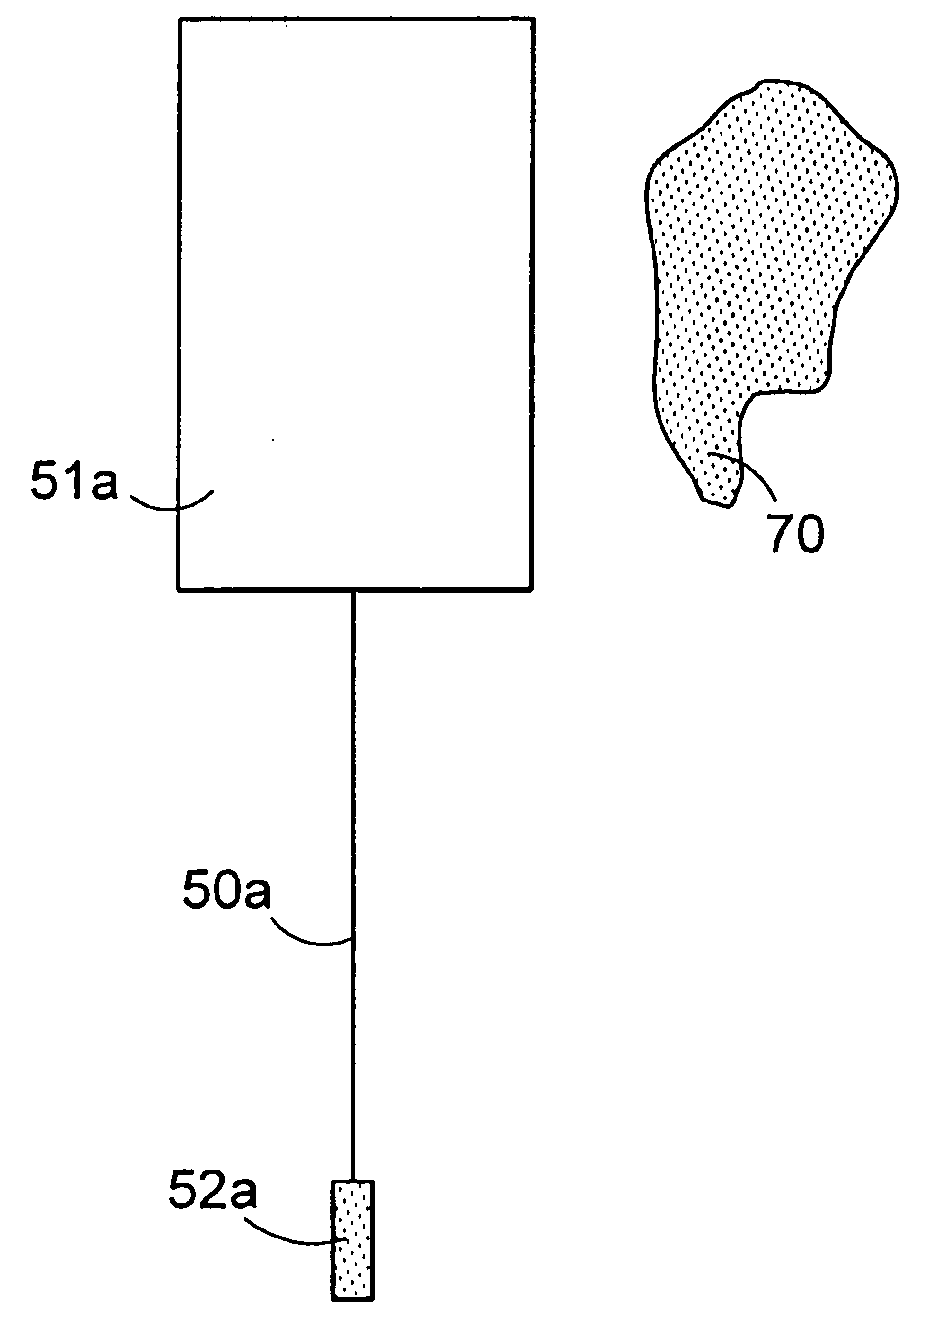 Method and apparatus for treating or preventing a medical condition